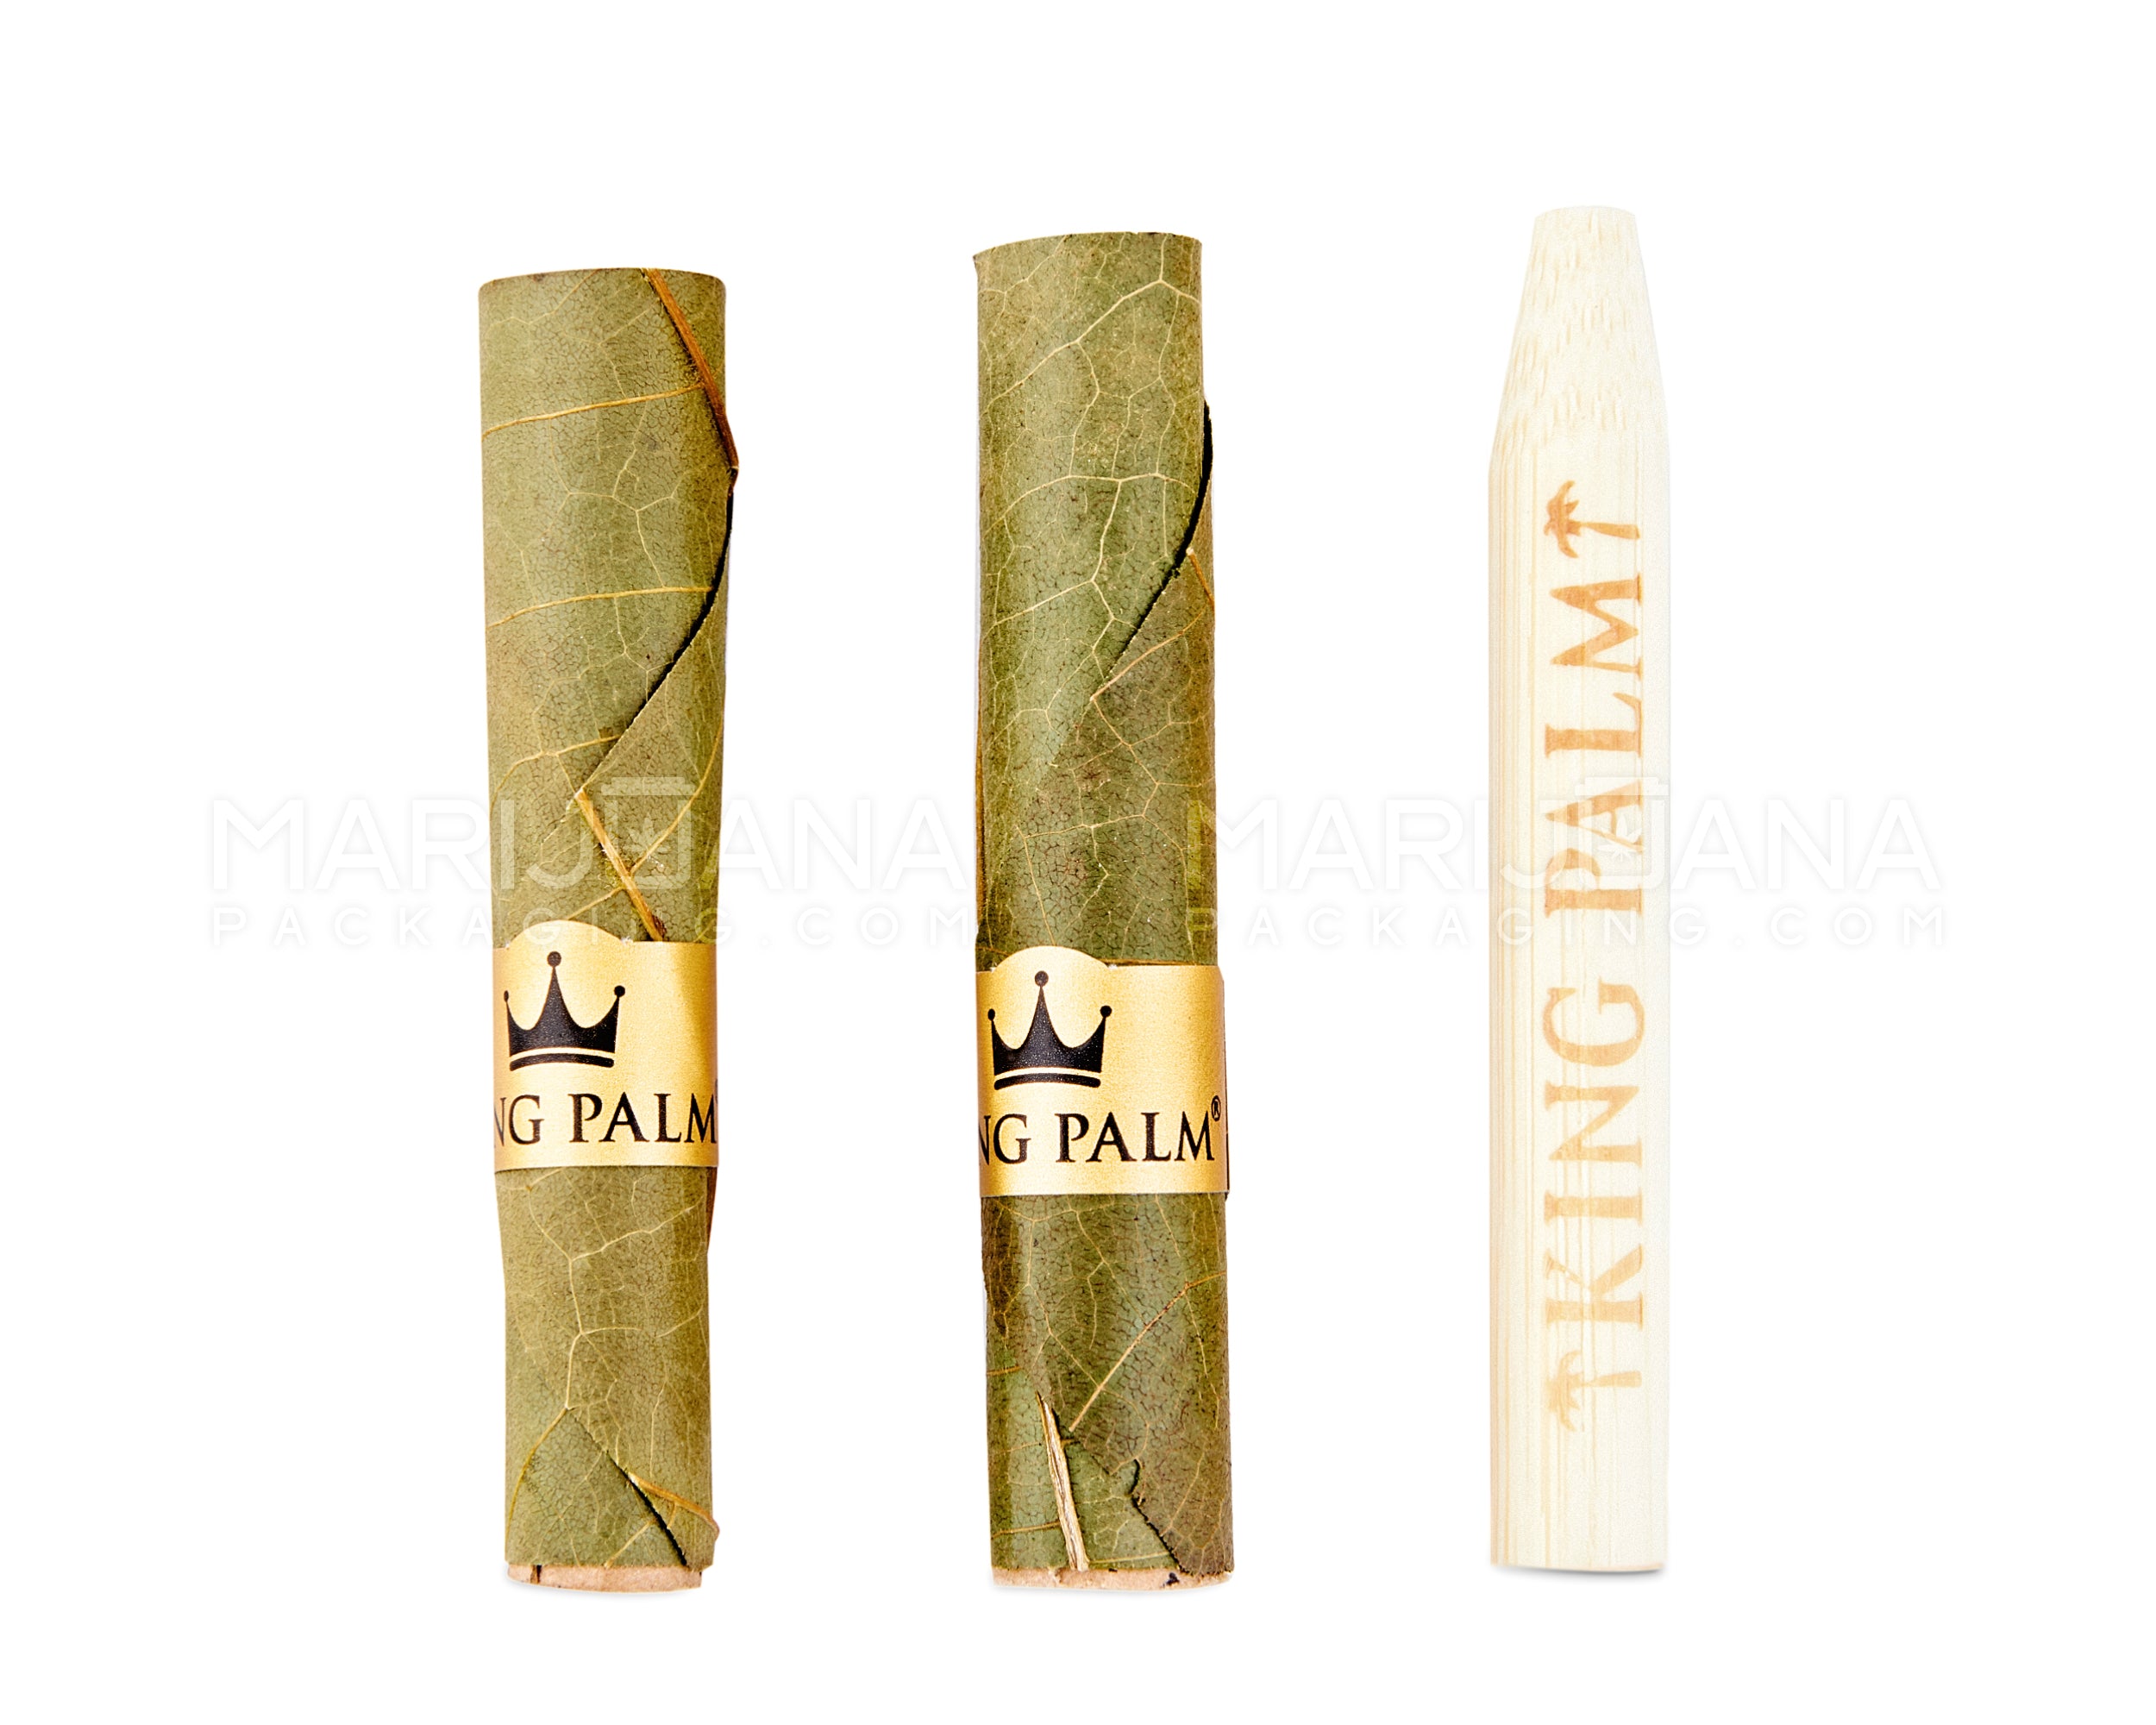 KING PALM | 'Retail Display' Rollie Green Natural Leaf Blunt Wraps | 54mm - Cherry Charm - 20 Count - 5